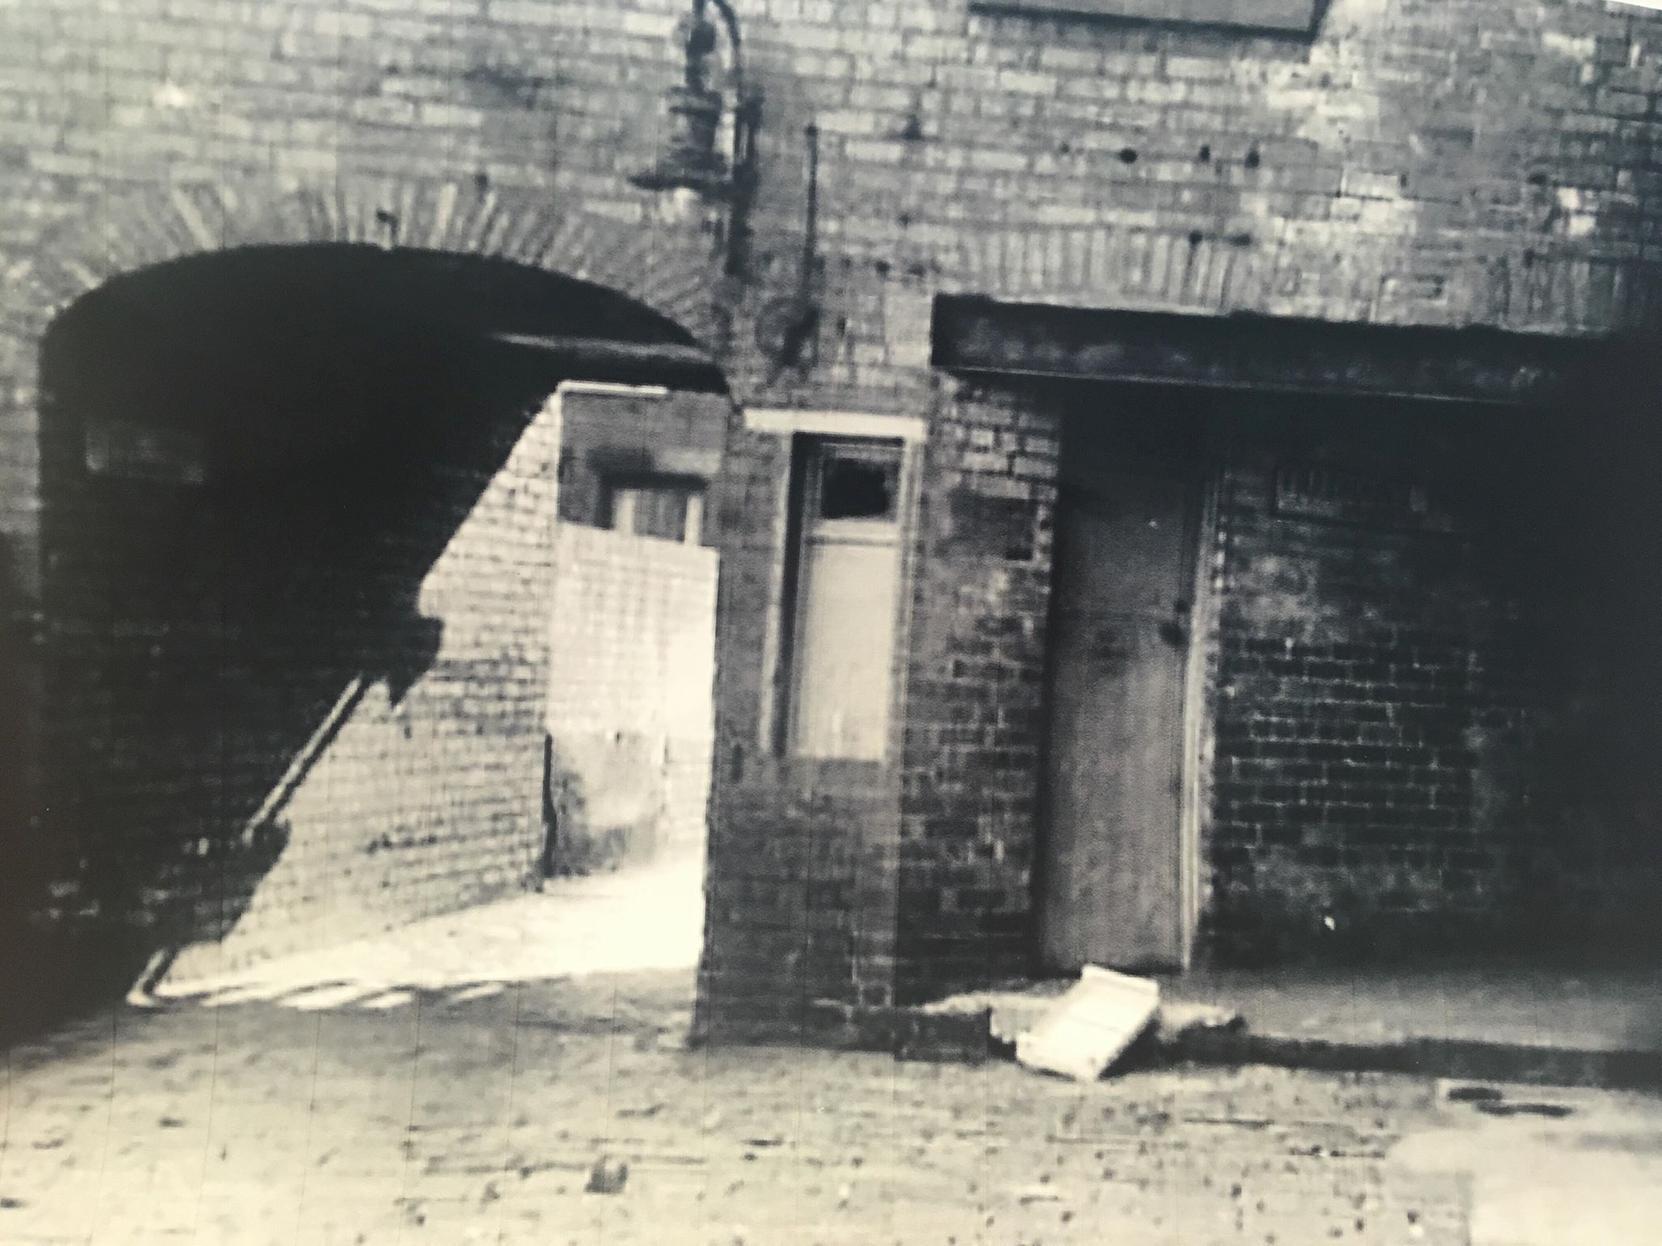 Photo provided by Ray Price, Star Yard in Pontefract, with the M&S sidewall  on the right and steps leading down to Roper Gate ahead